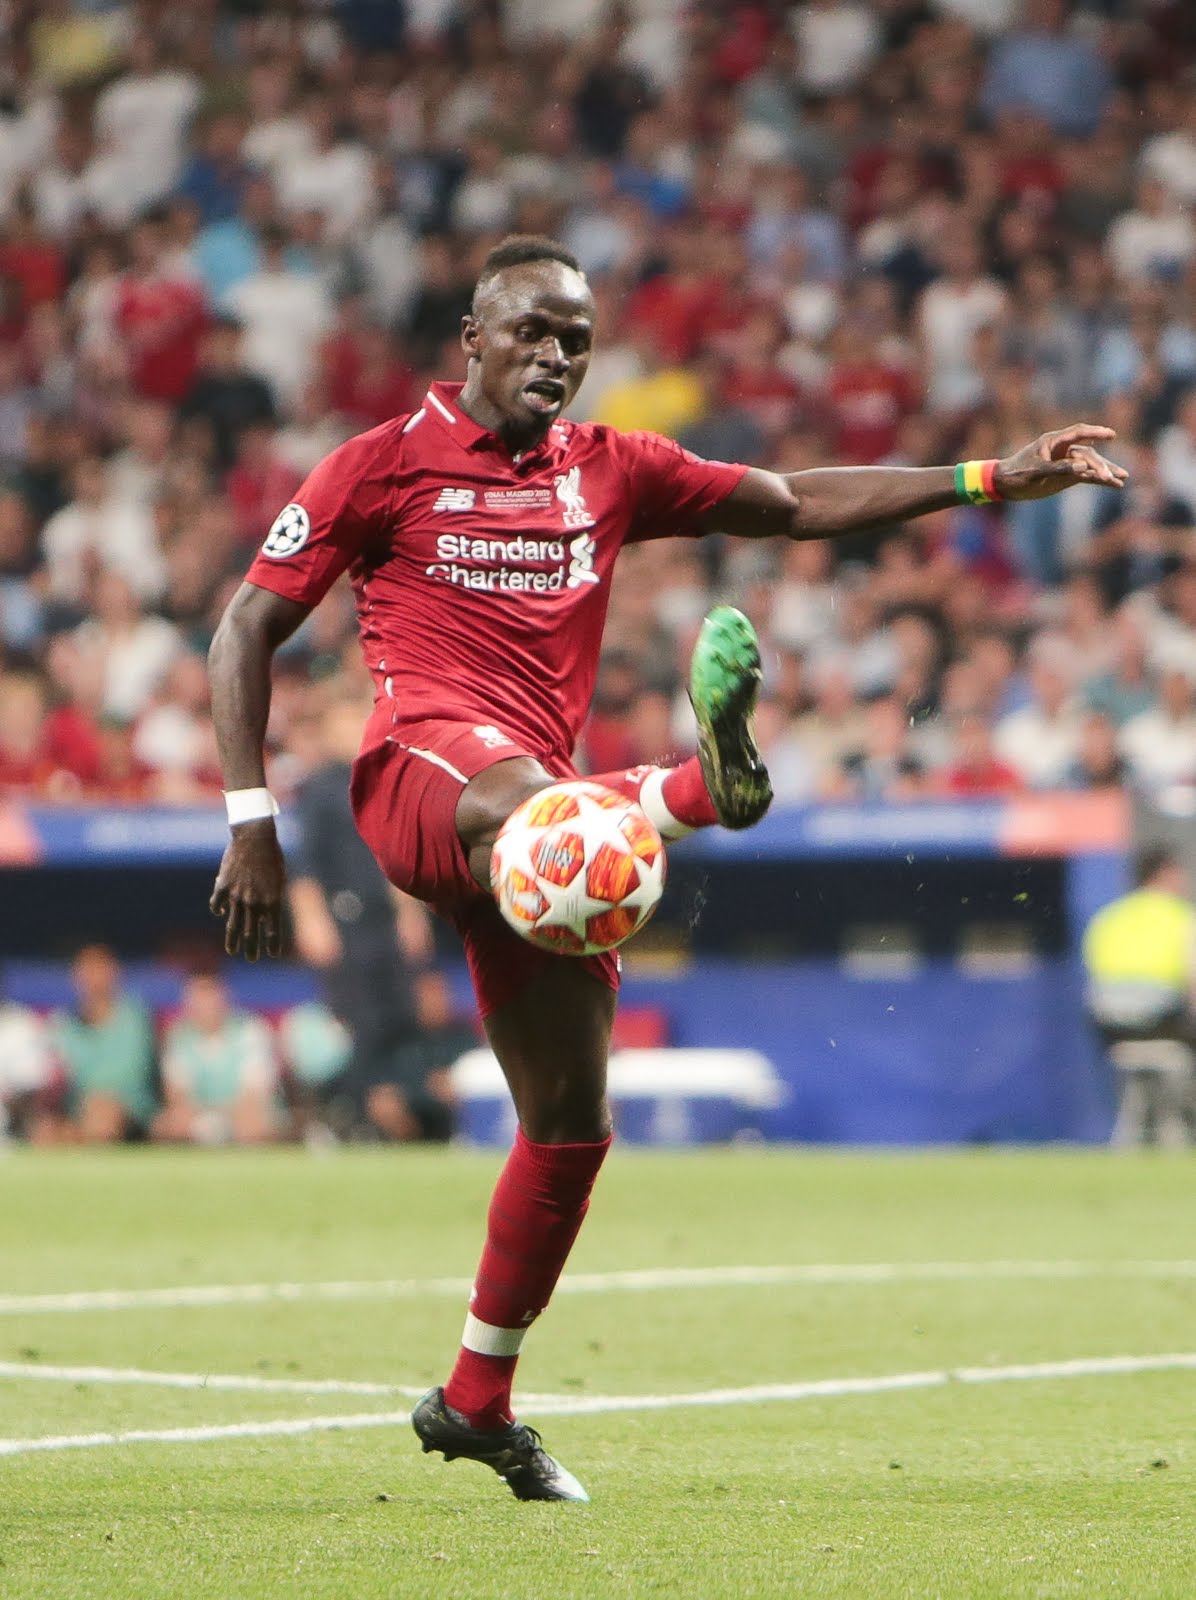 Sadio Mane with the ball for Liverpool